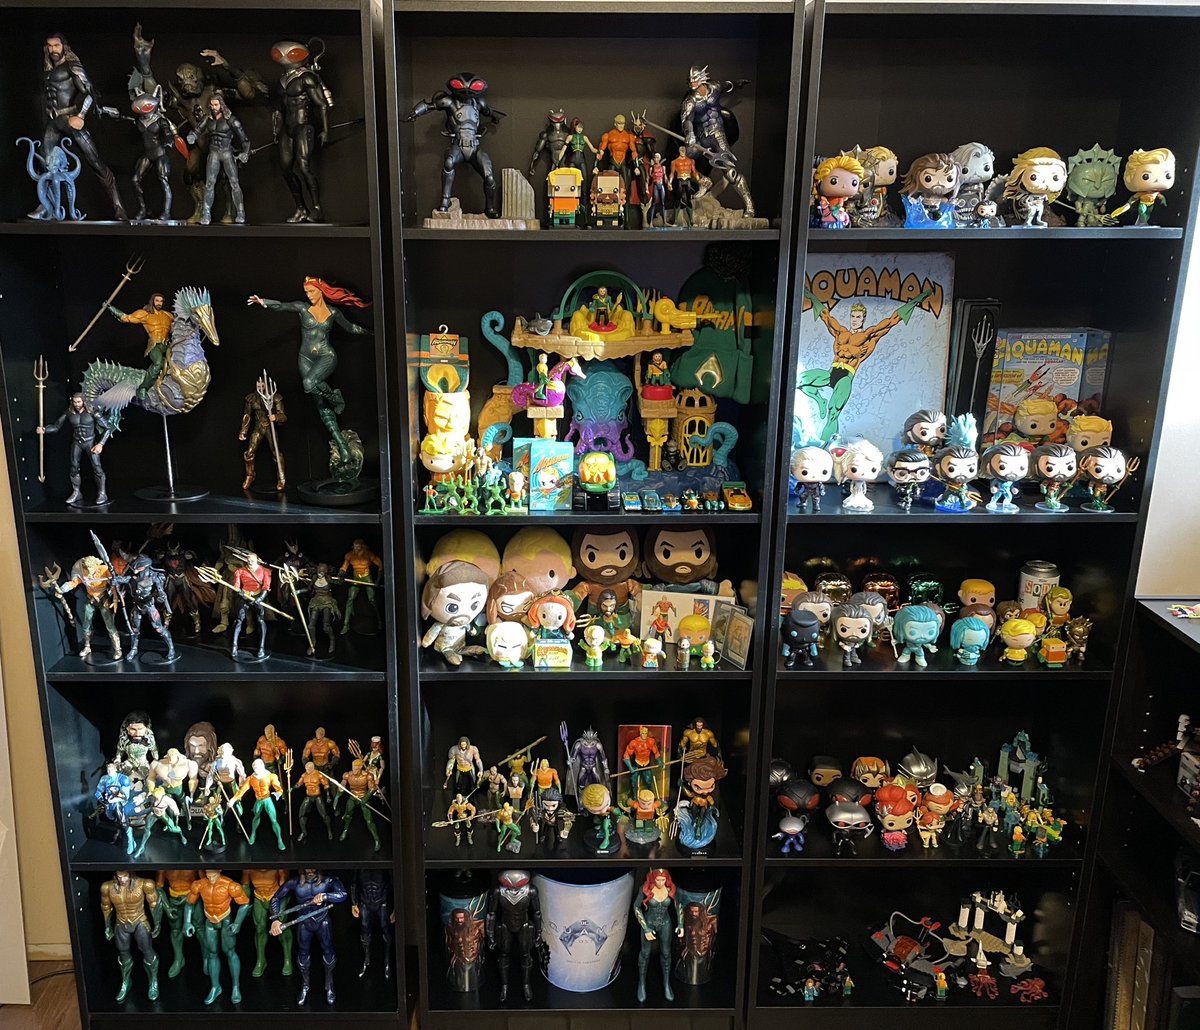 Dusting Day for the @aquamanmovie collection!! Two hours well spent with @OriginalFunko @LEGO_Group @SpinMaster @mcfarlanetoys and others! @DCOfficial @AquamanUniverse